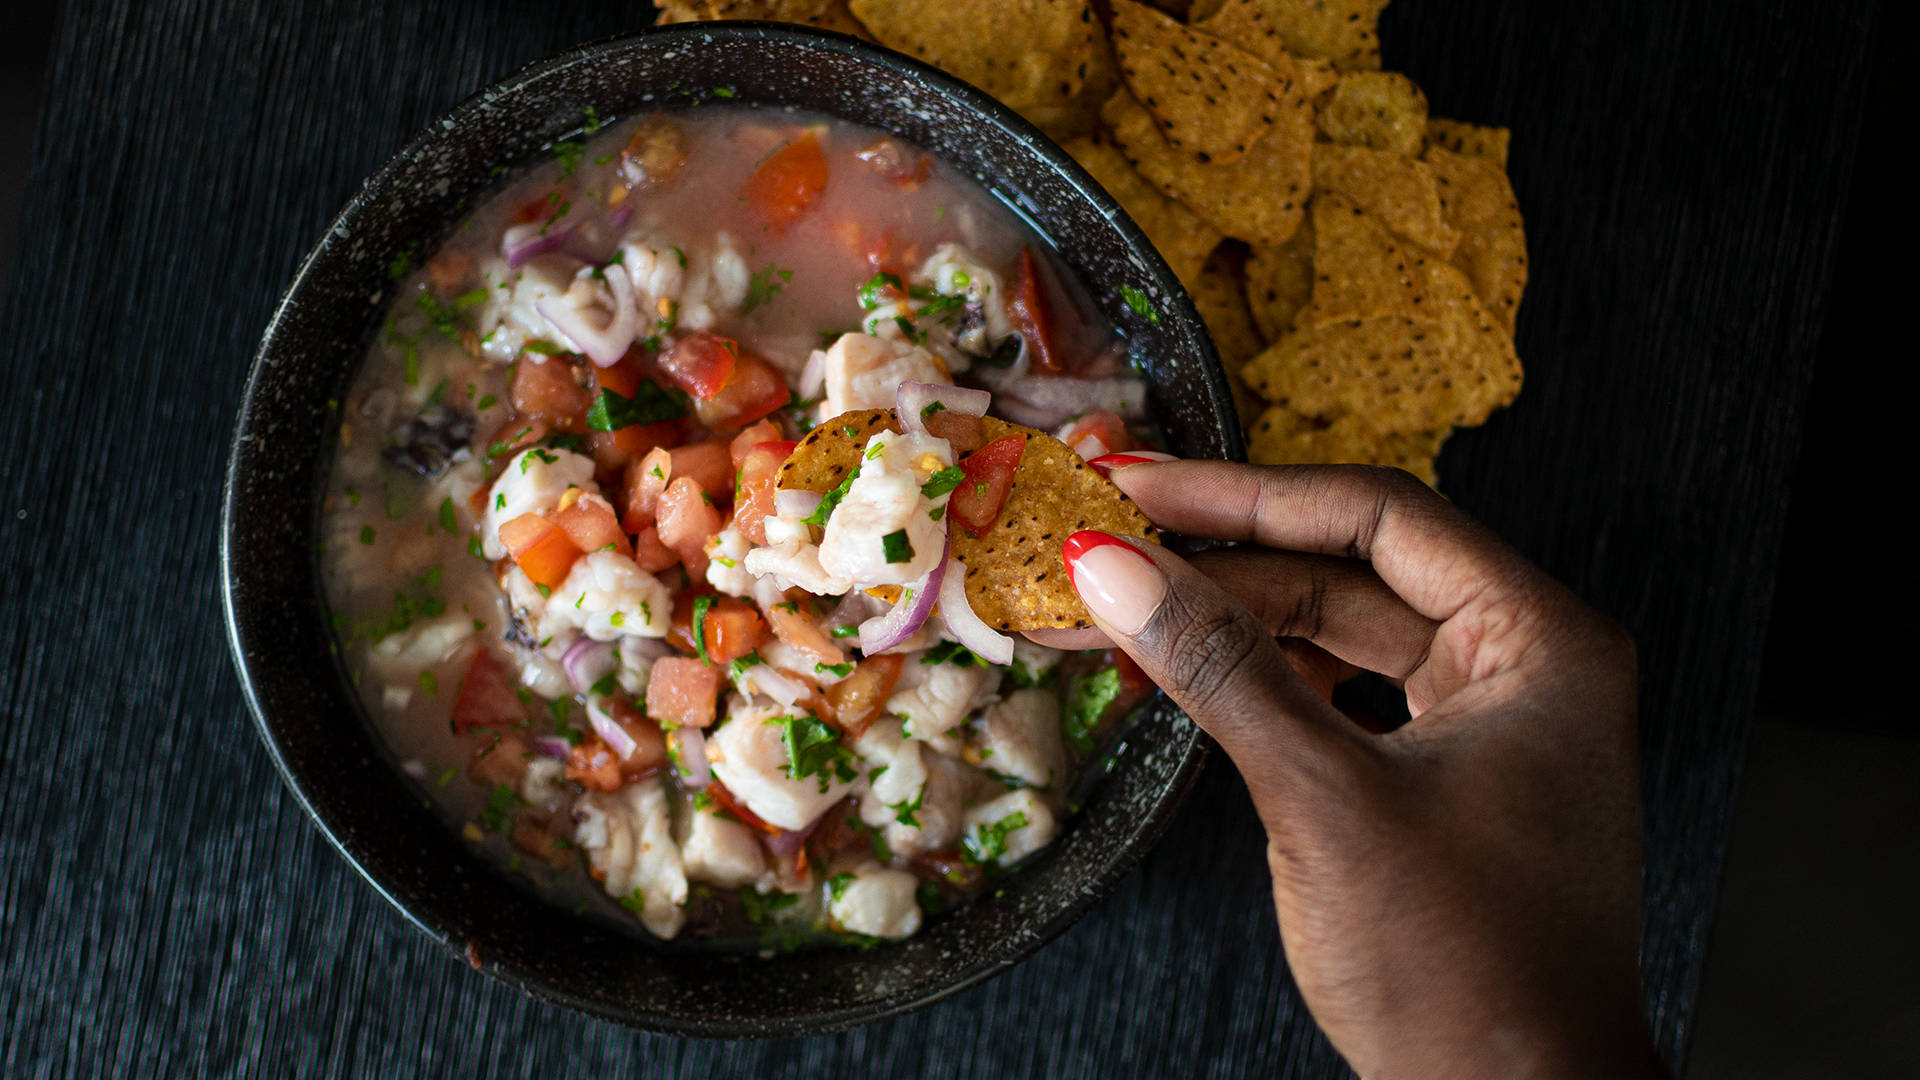 Cornchips In Ceviche Dip Is Translated To German As 